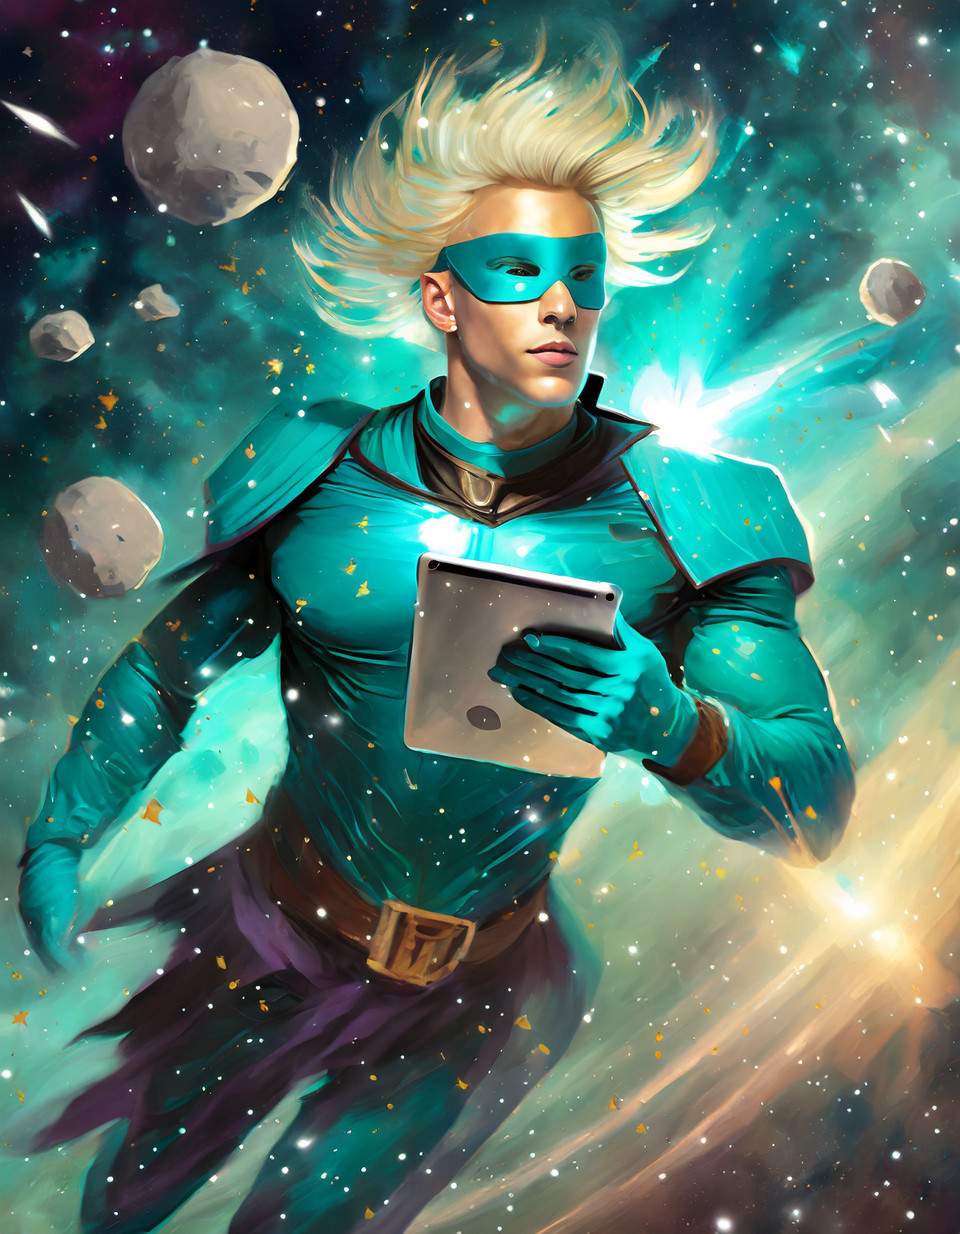 turquoise superhero consisting of ones and zeros with turquoise hair, with ipad, flies in the space